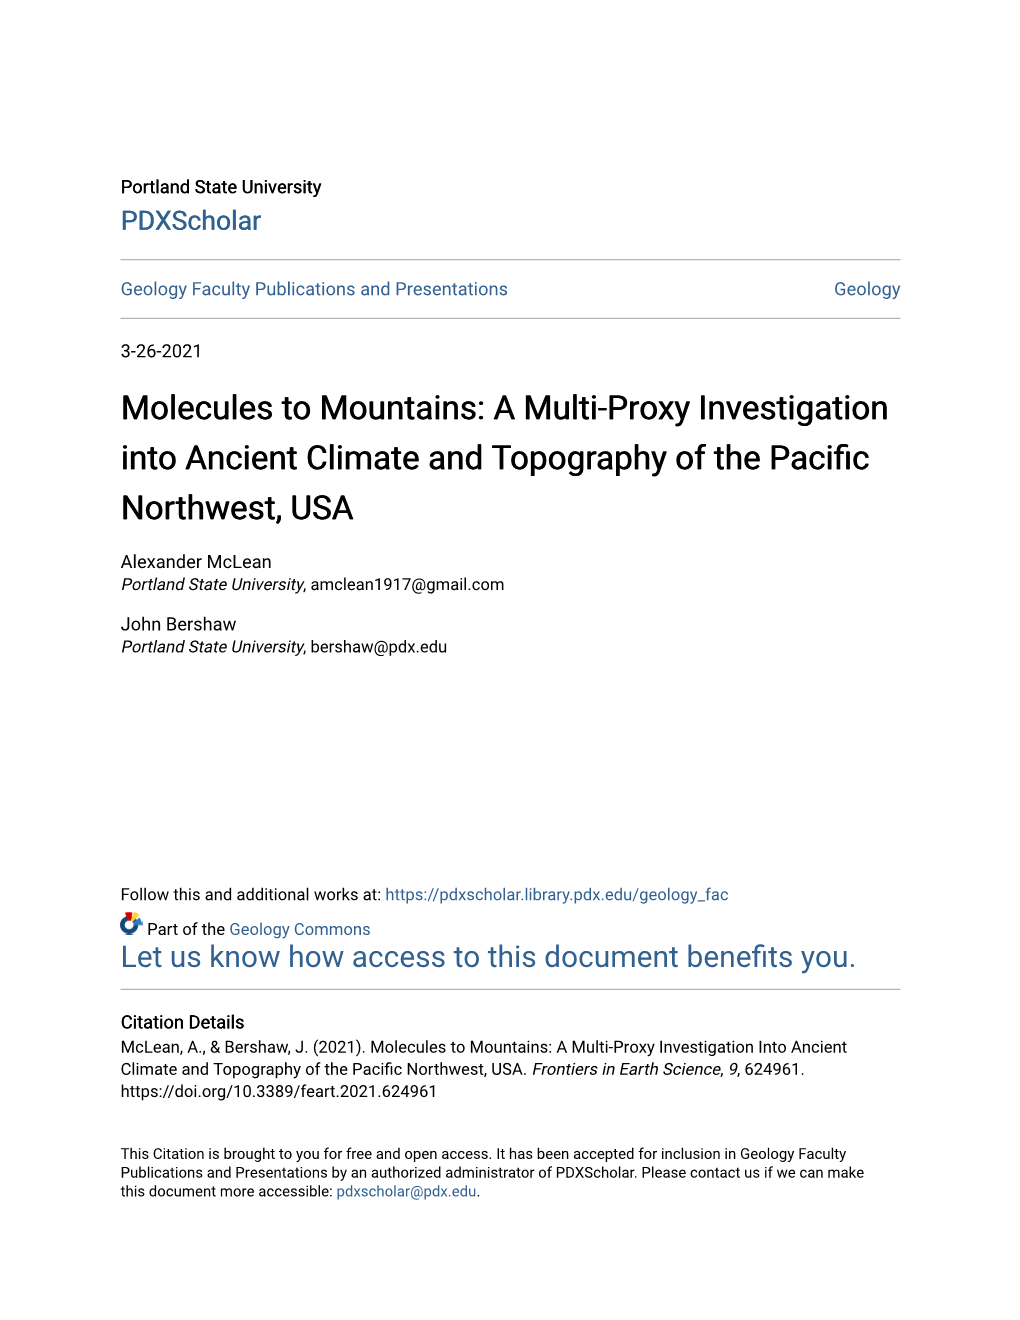 A Multi-Proxy Investigation Into Ancient Climate and Topography of the Pacific Northwest, USA